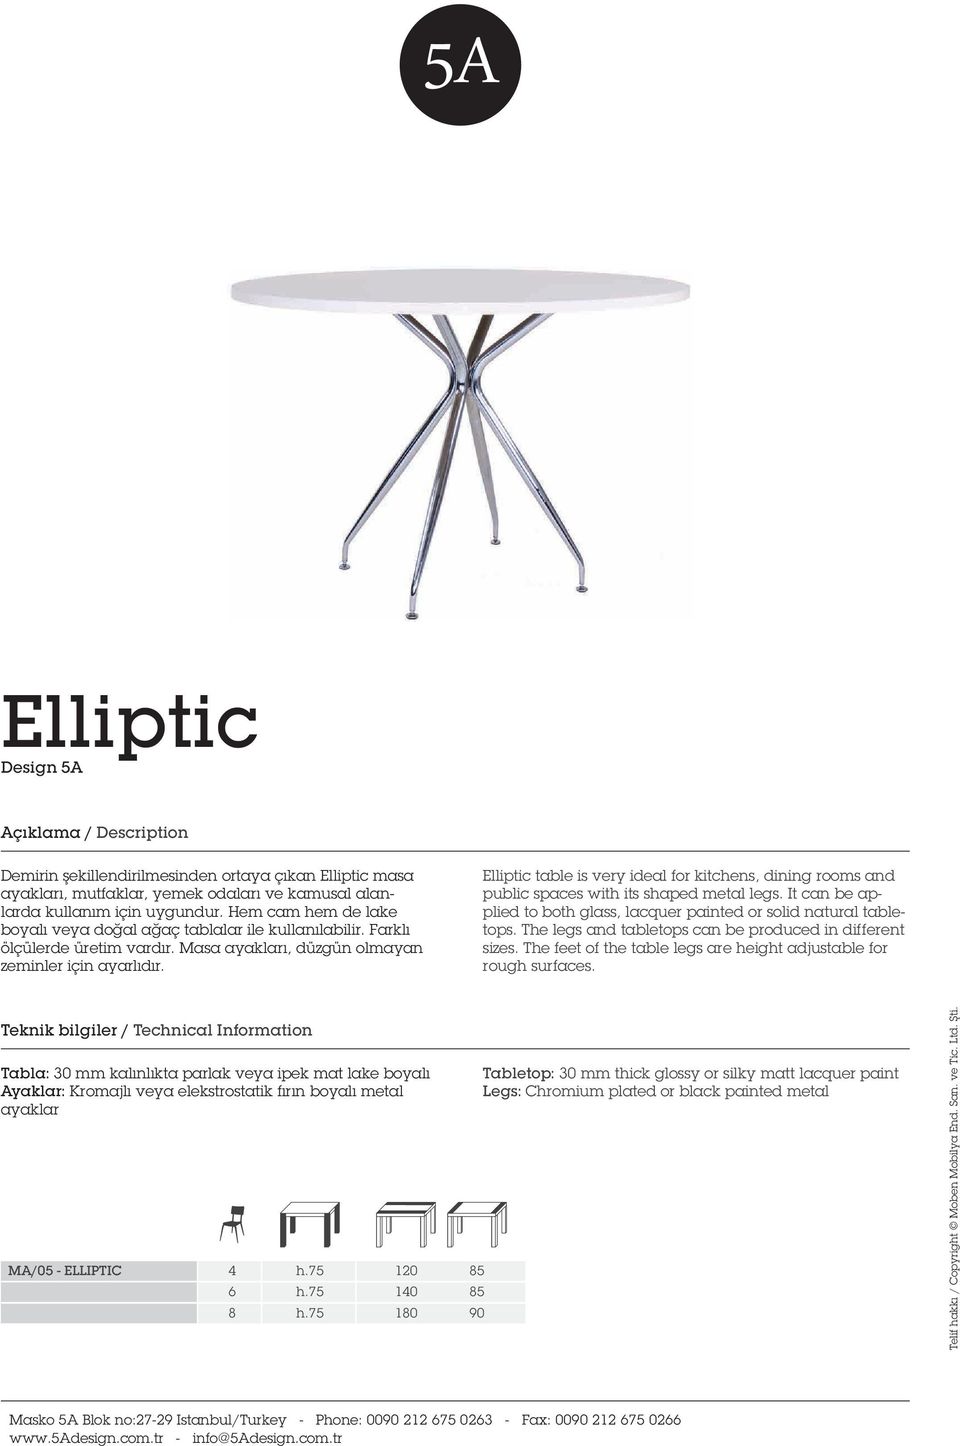 Elliptic table is very ideal for kitchens, dining rooms and public spaces with its shaped metal legs. It can be applied to both glass, lacquer painted or solid natural tabletops.